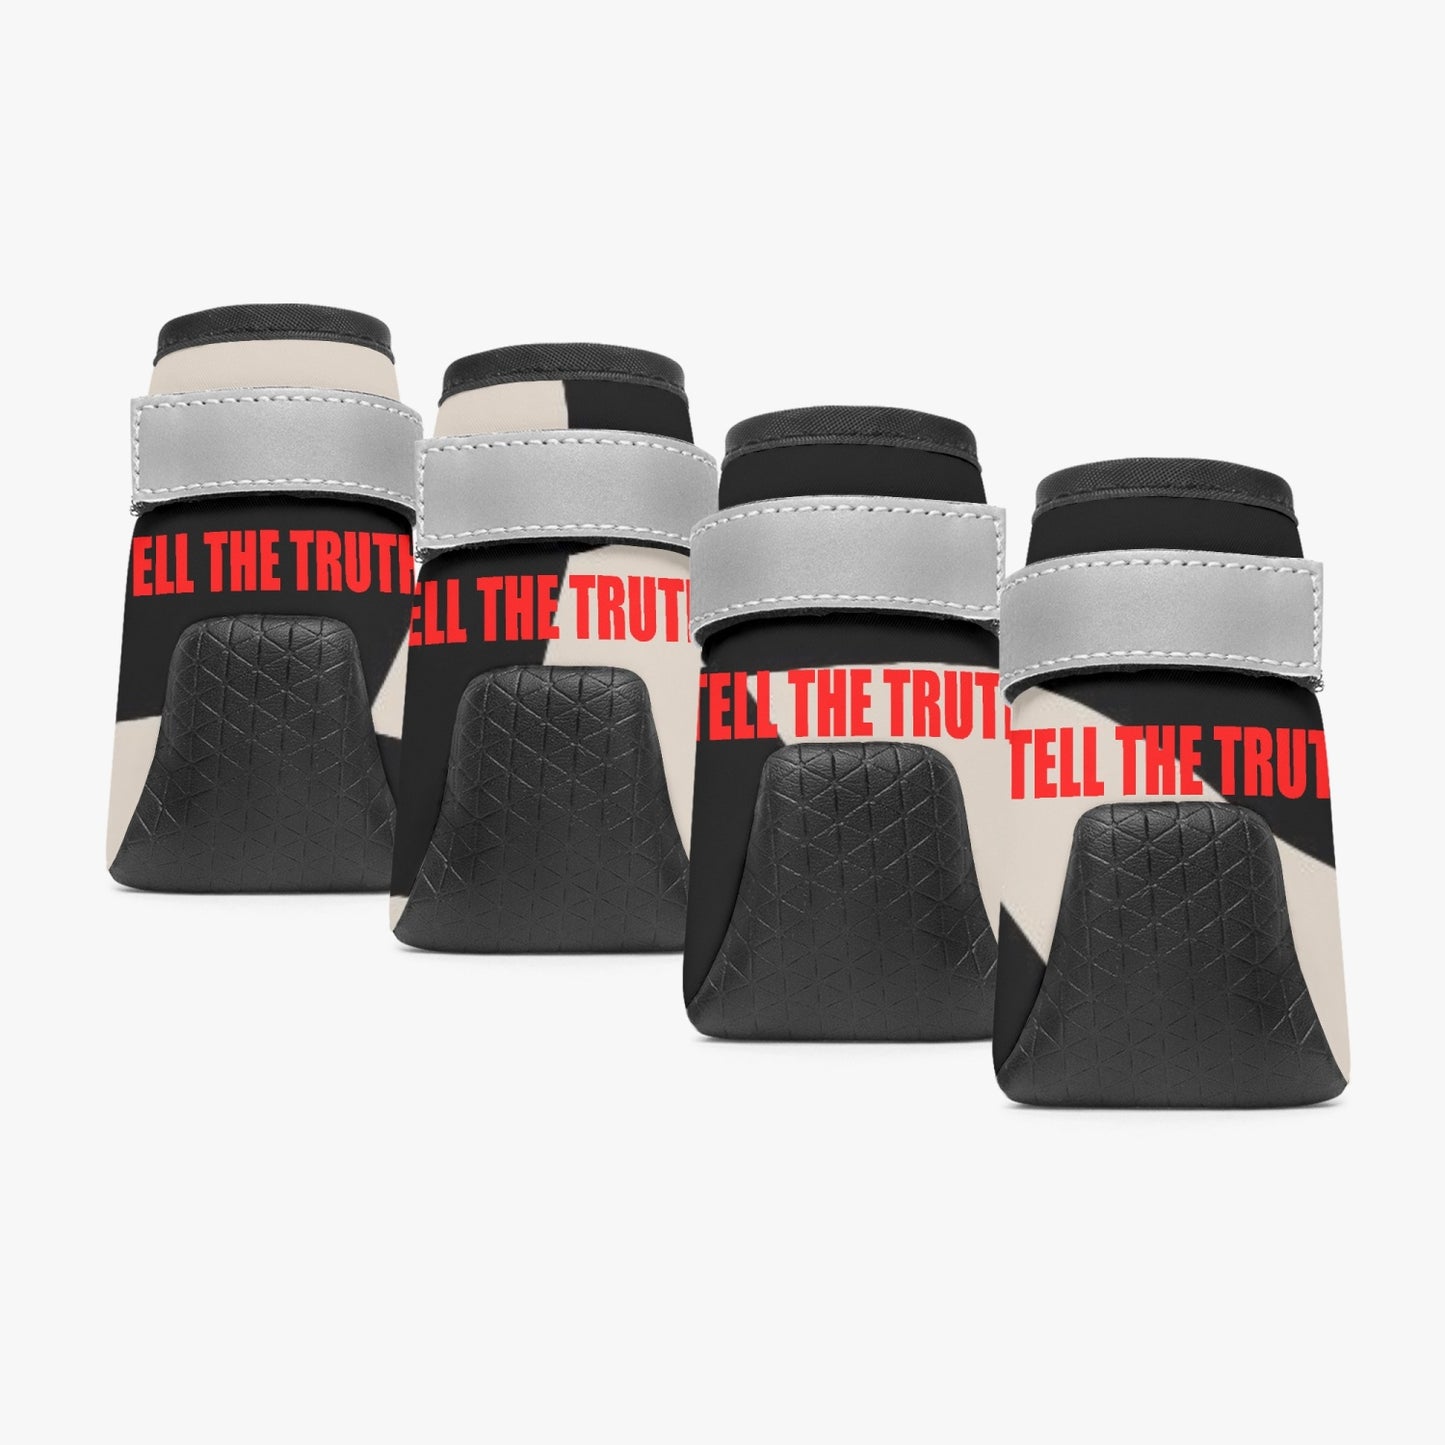 TELL THE TRUTH PET BOOTIES FOR DOGS